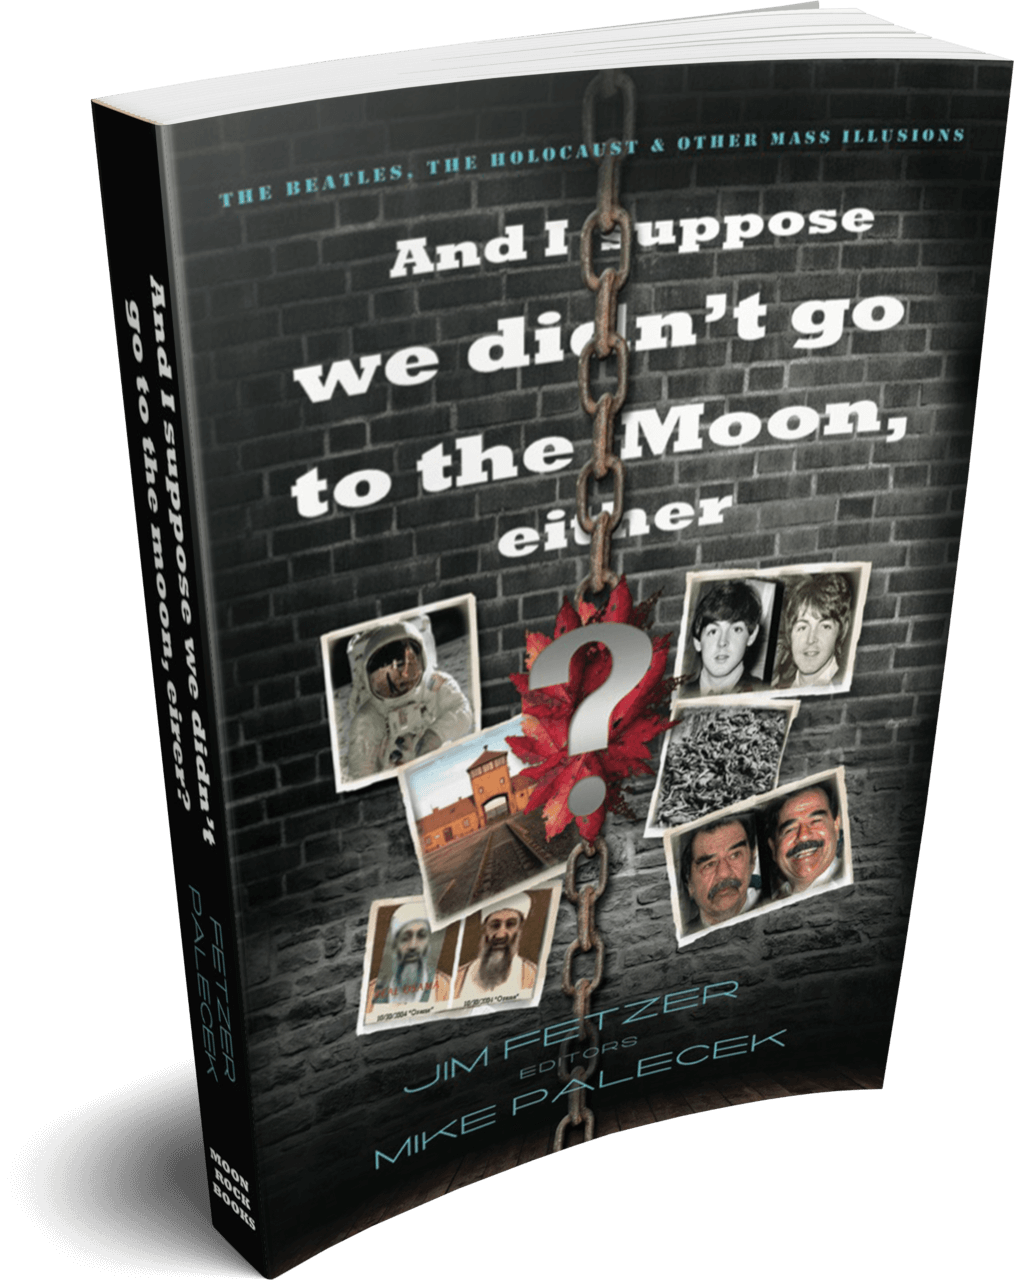 And I suppose we didn’t go to the Moon, either? (1st edition)